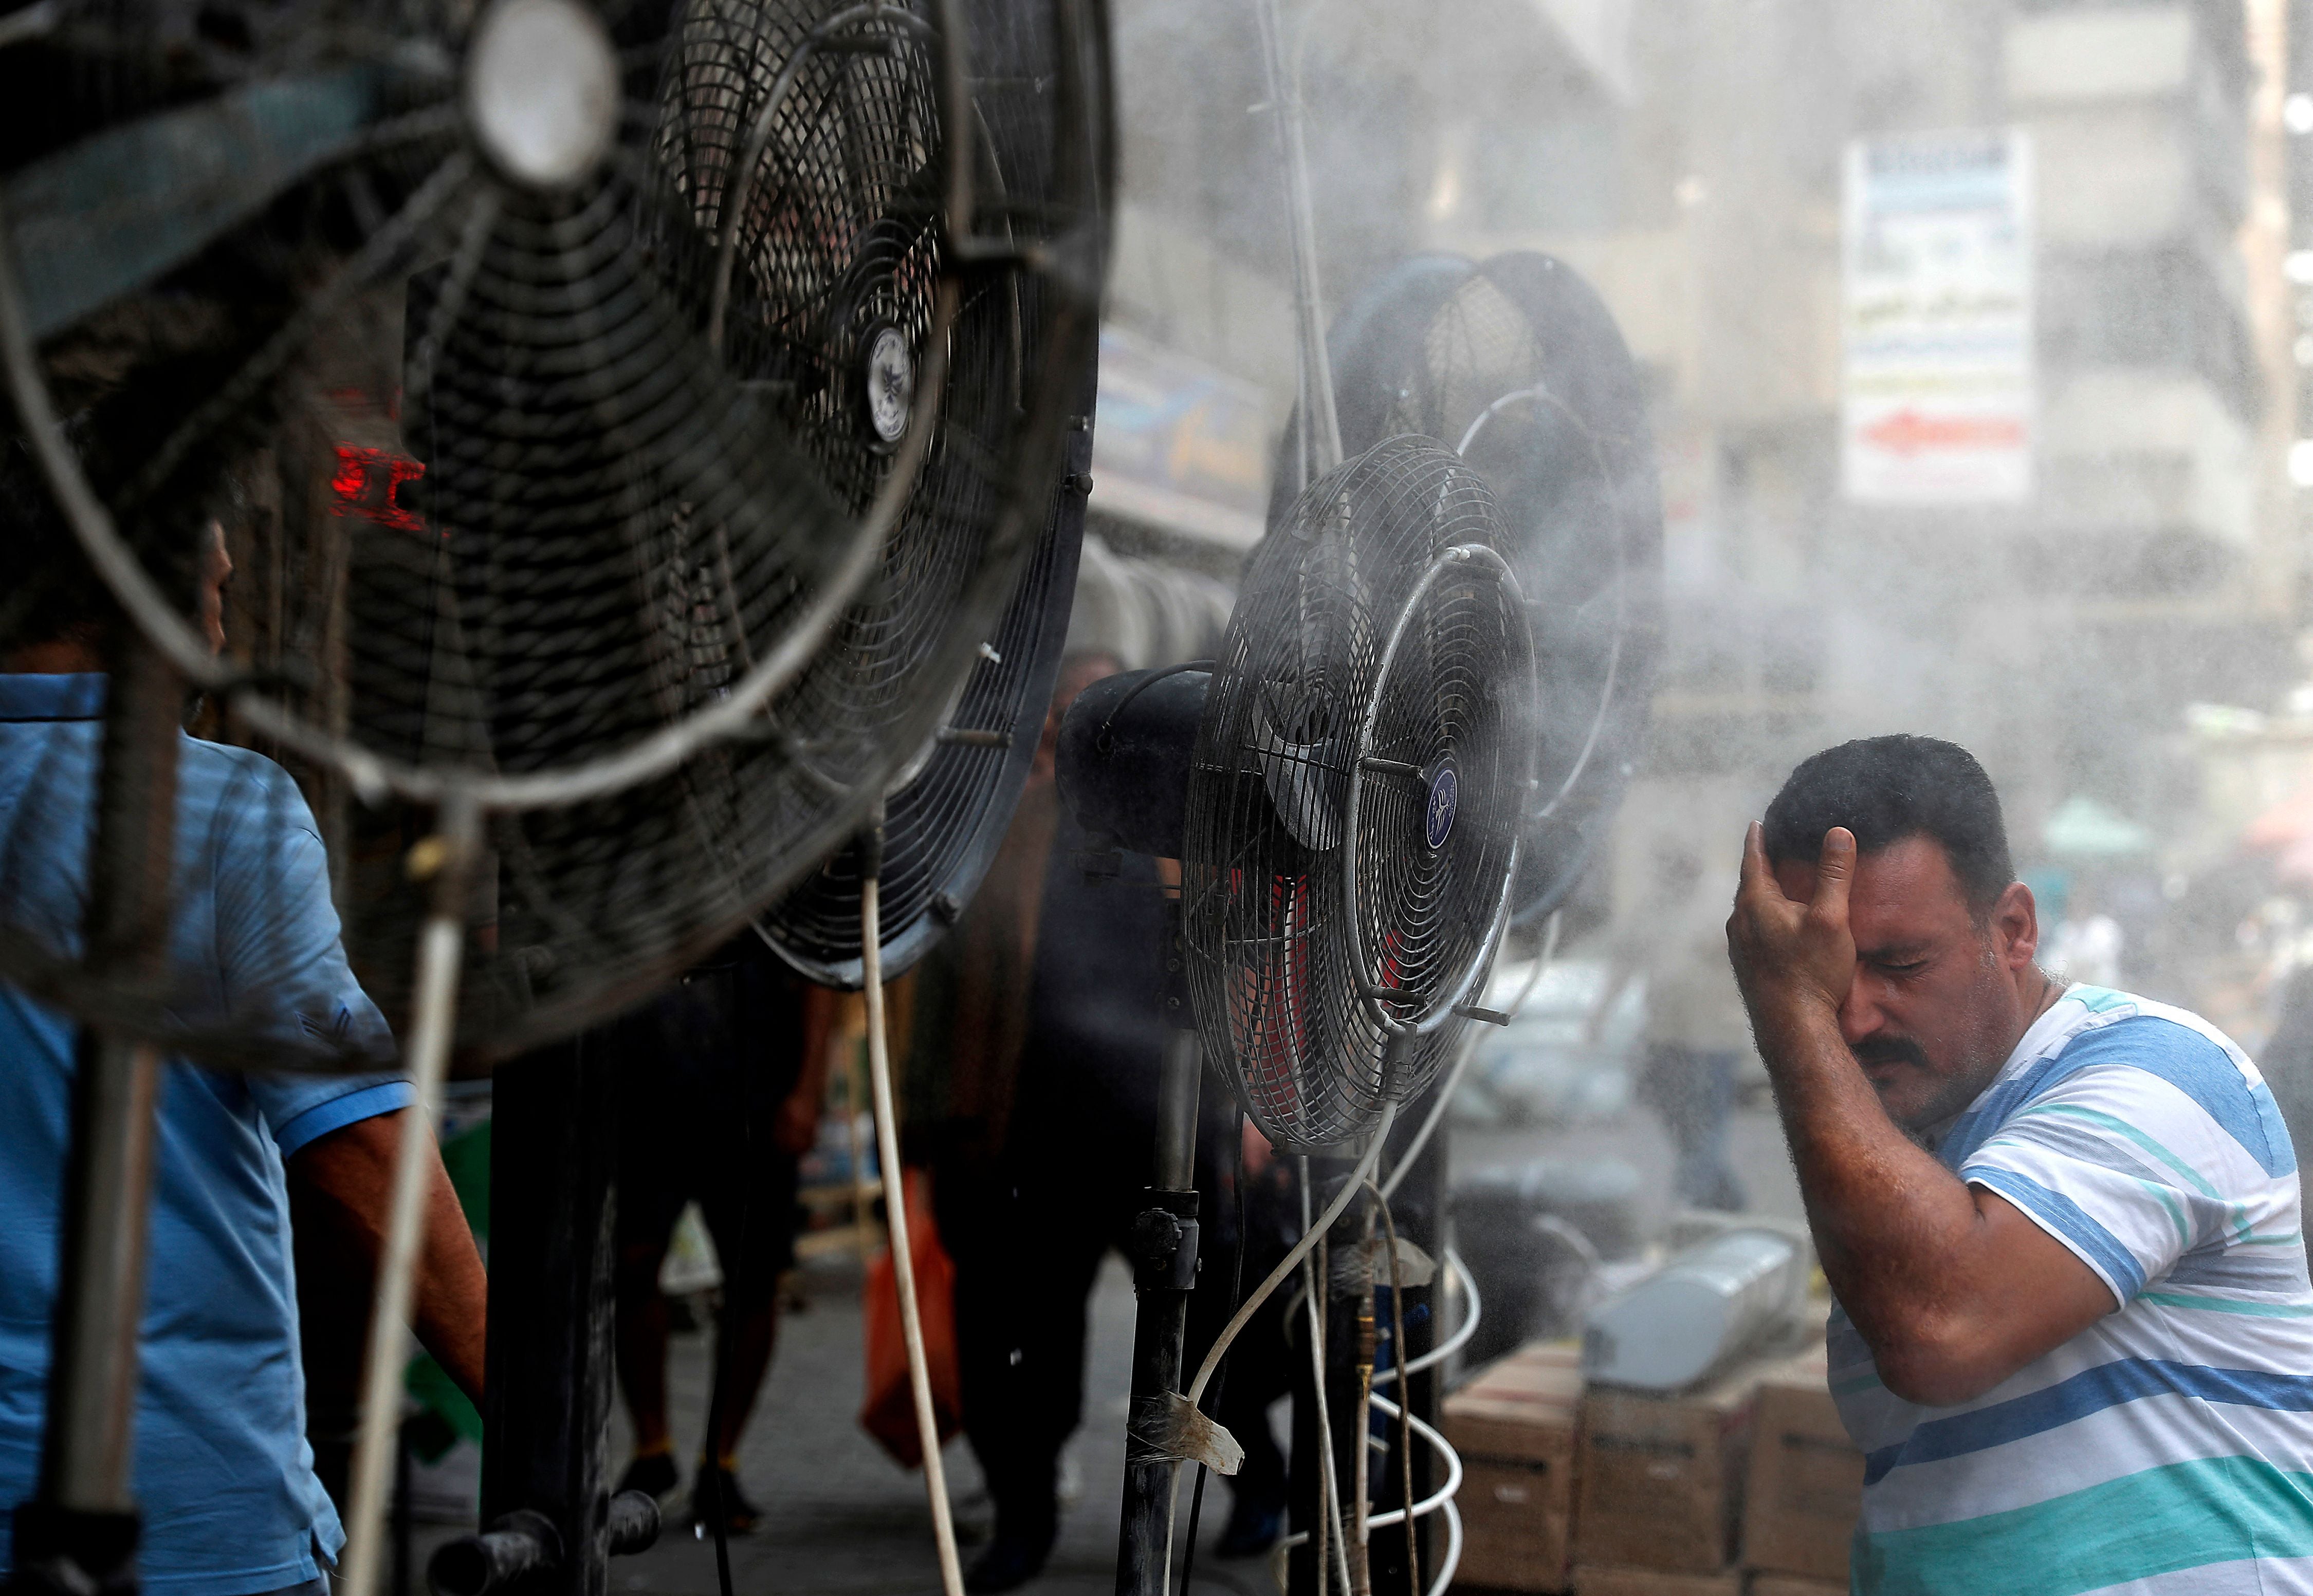 A man stands by fans spraying water vapour deployed by donors to cool down pedestrians in Iraq’s capital Baghdad